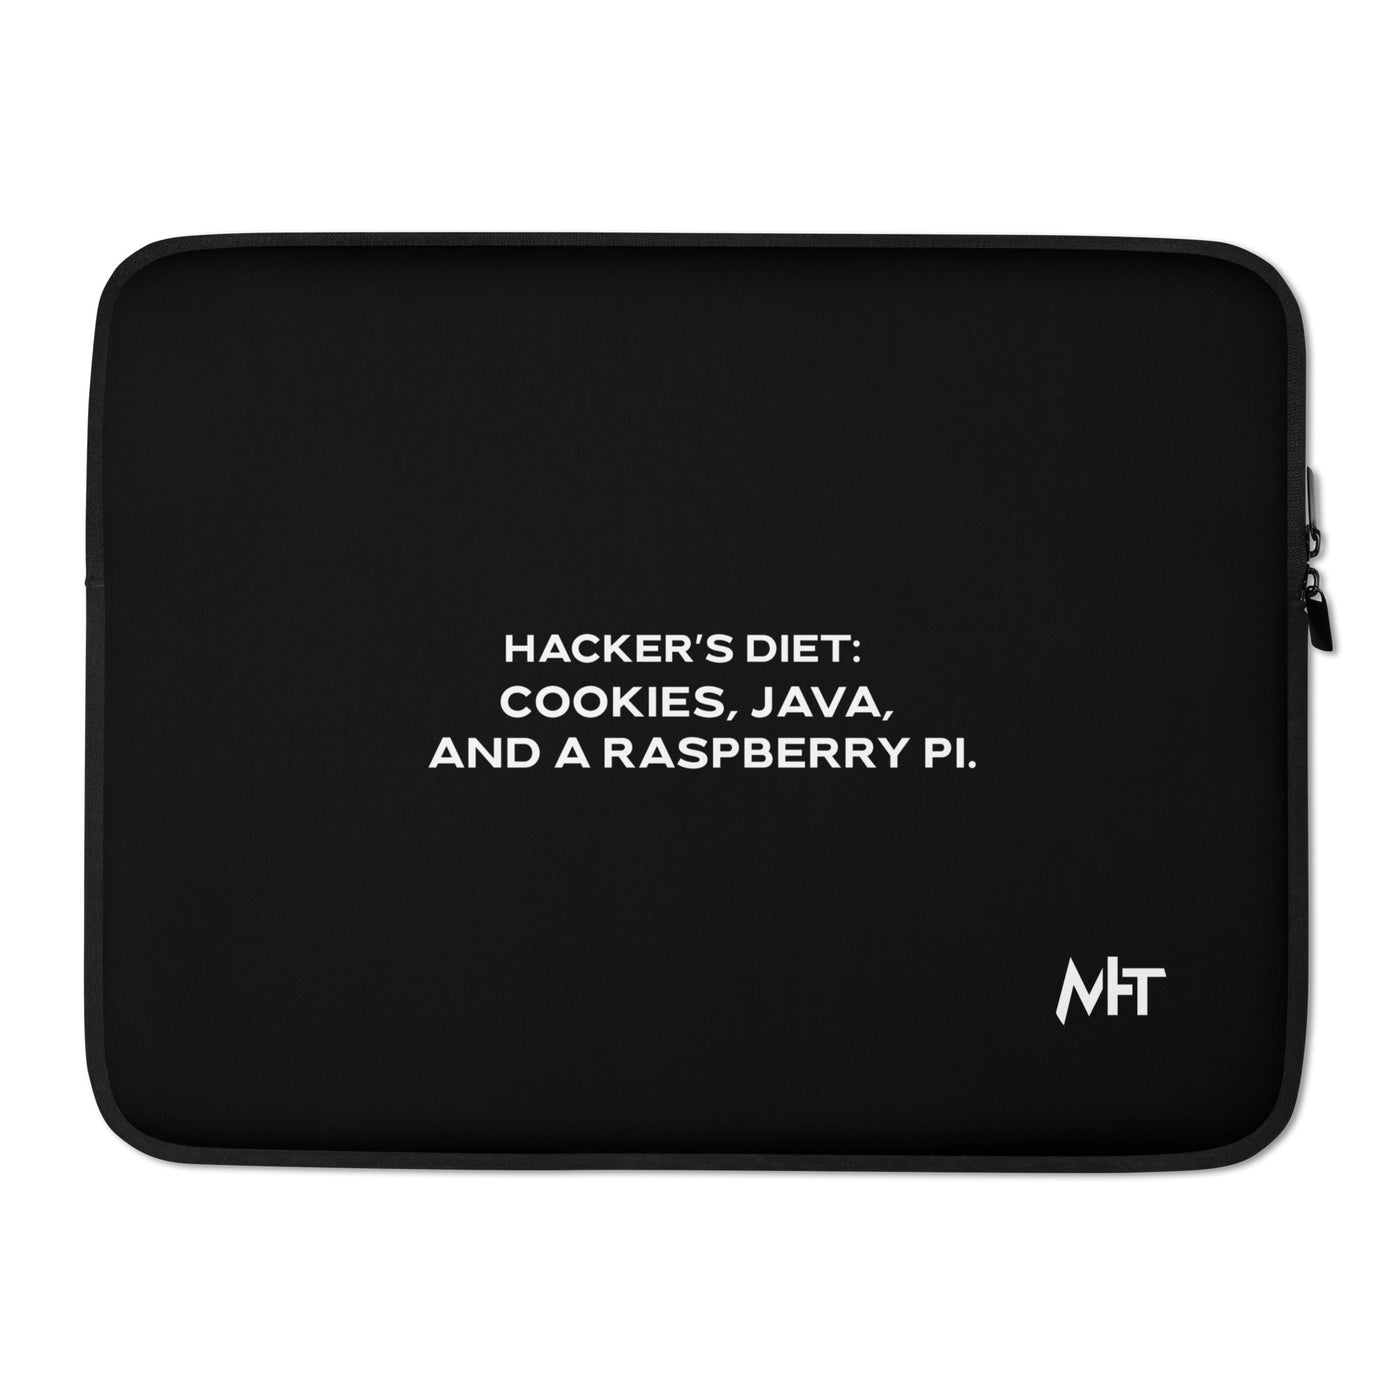 Hackers diet : Cookies, Java and a Raspberry Pi V2 - Laptop Sleeve